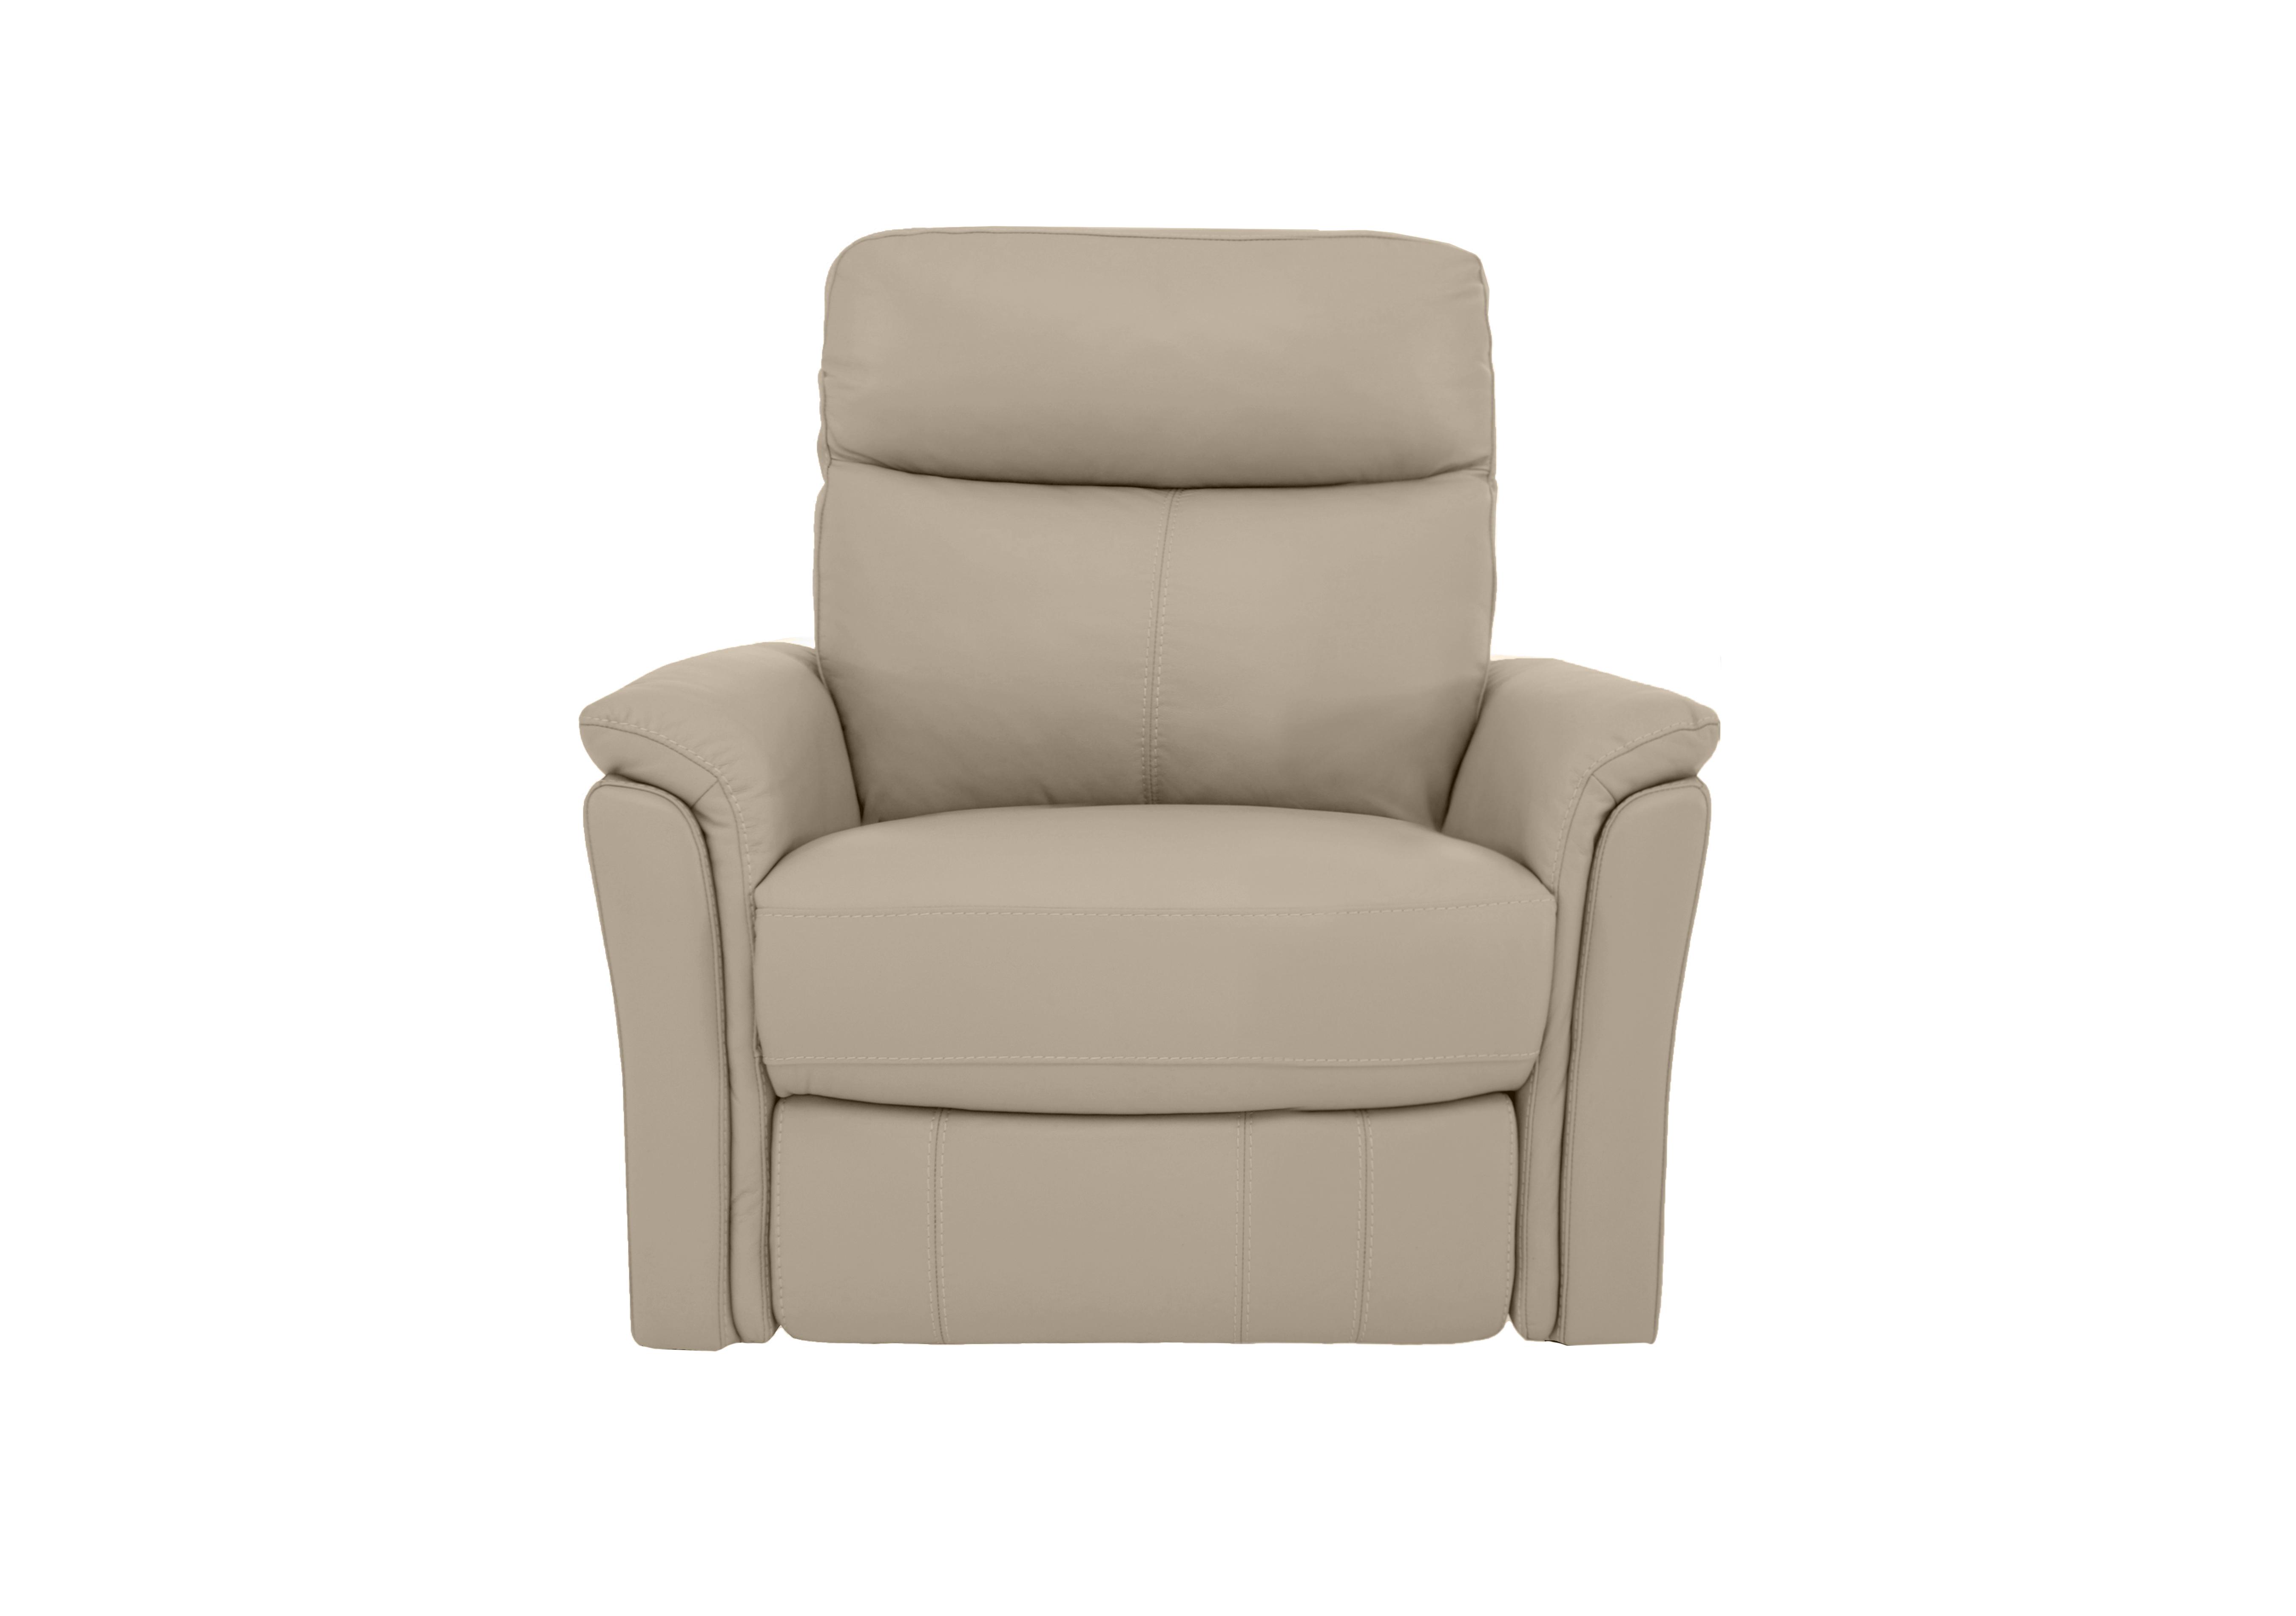 Compact Collection Piccolo Recliner Armchair in Bv-041e Dapple Grey on Furniture Village